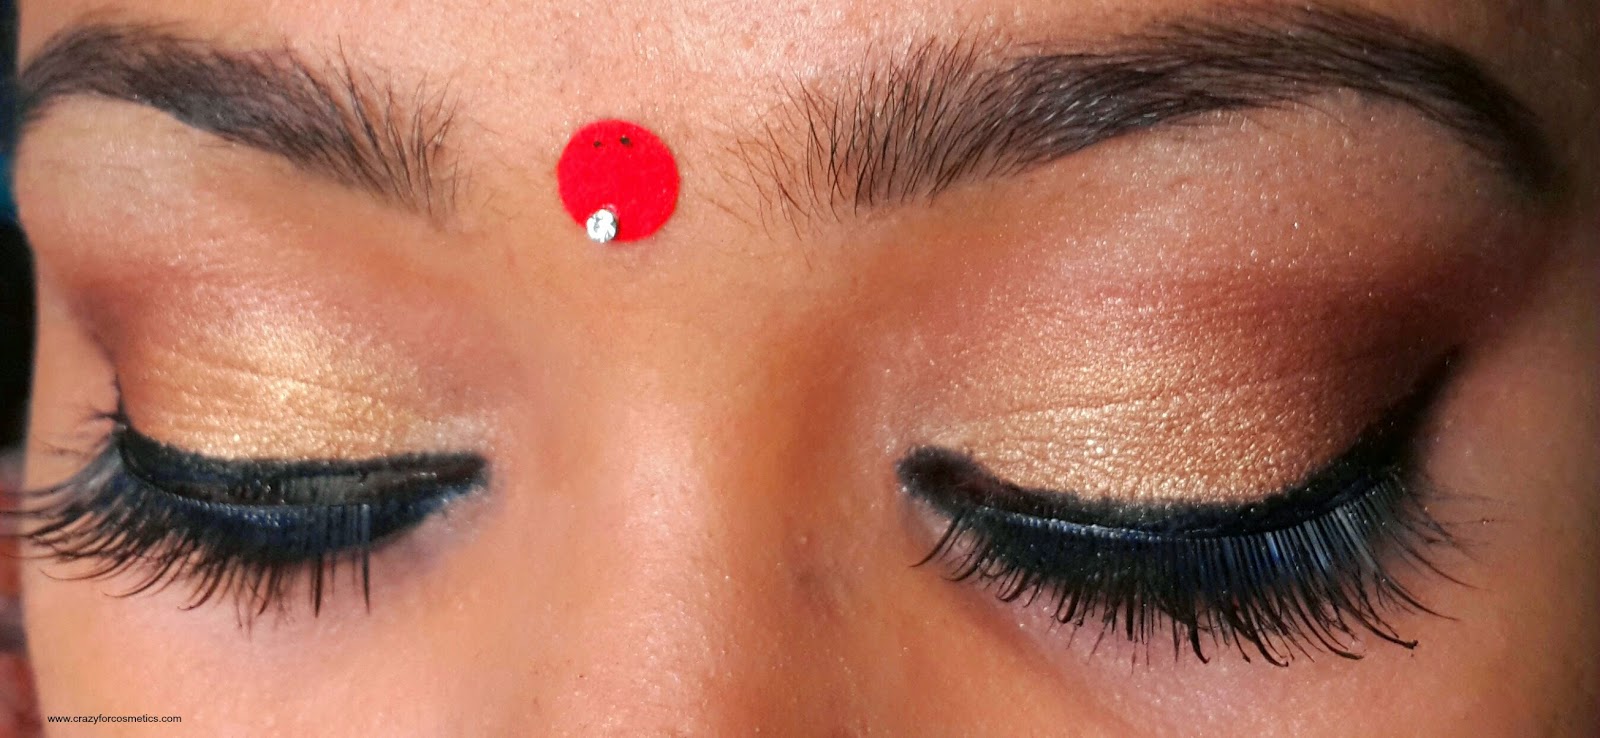 Which eye makeup should I use on a black saree? - Quora